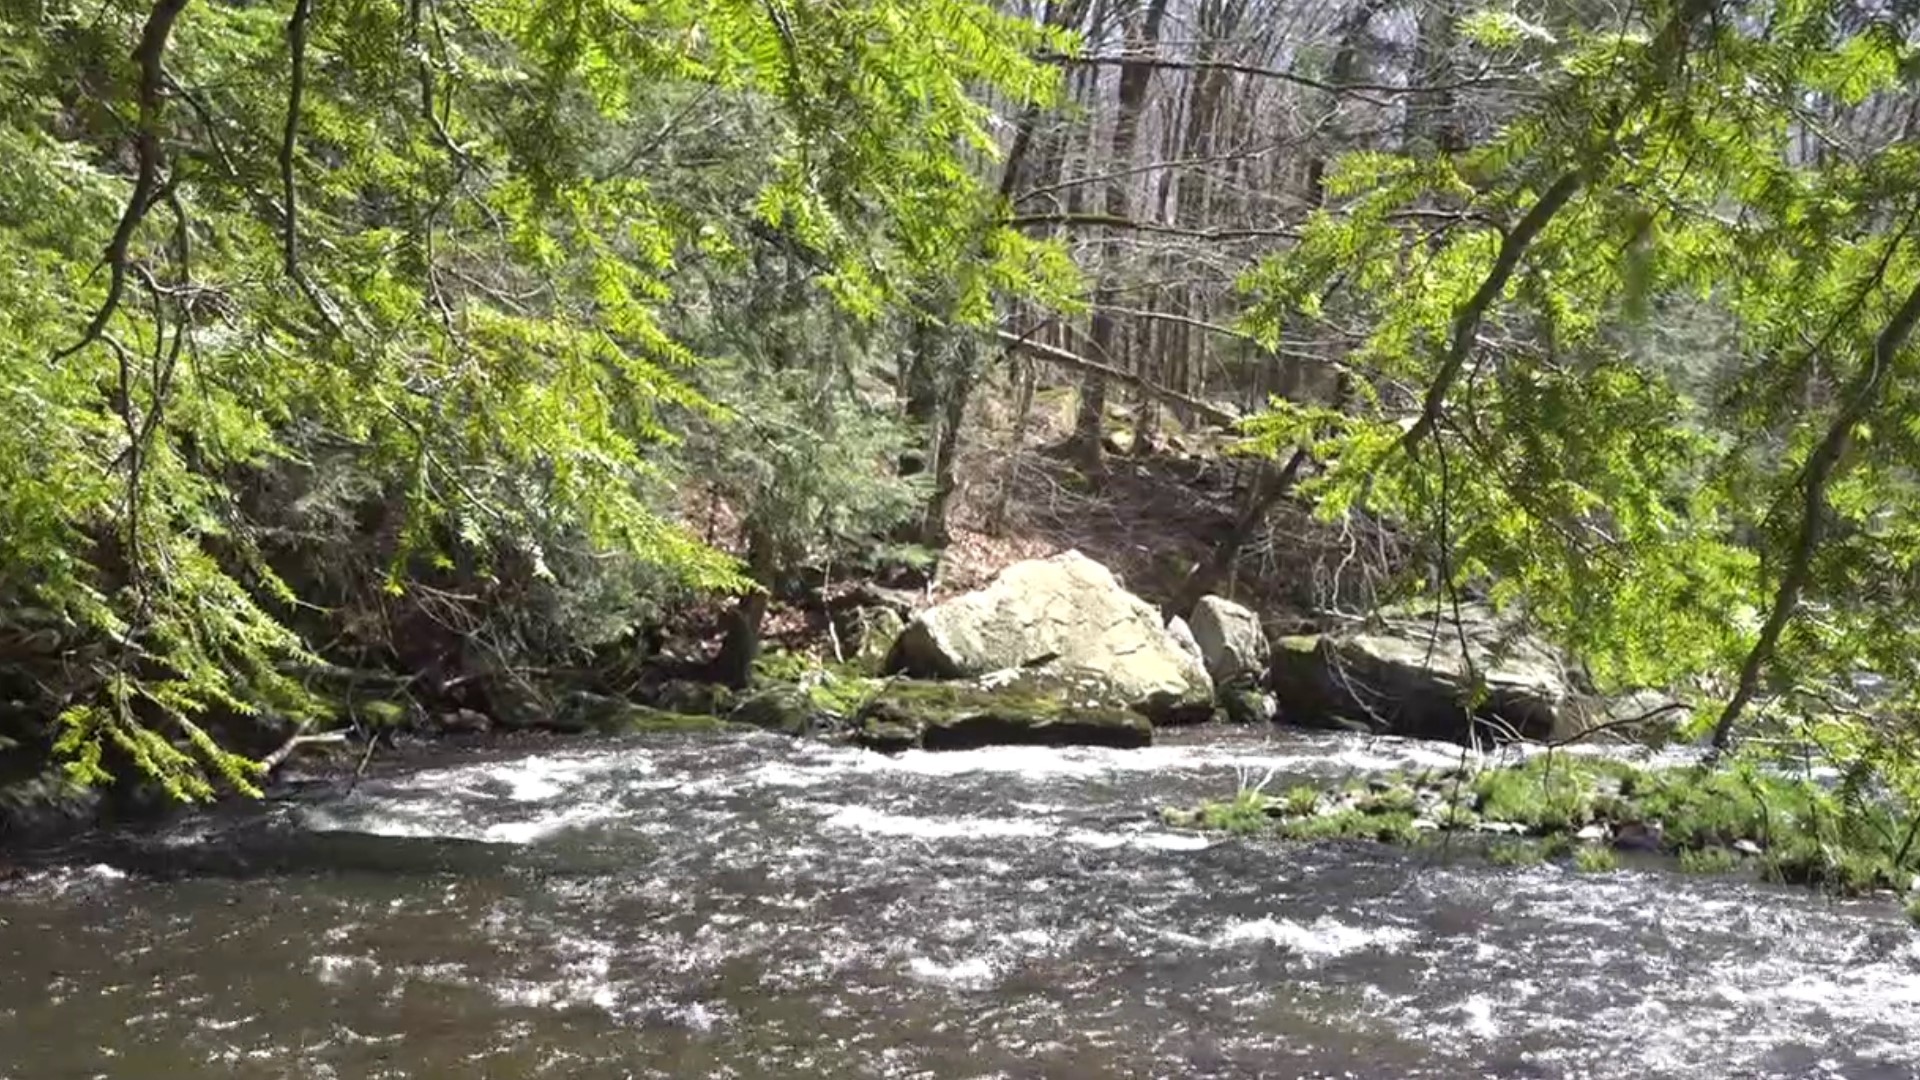 Newswatch 16's Photojournalist Bonnie Frisbie shares a bit of the beauty of the Lackawanna River in Clifford Township.